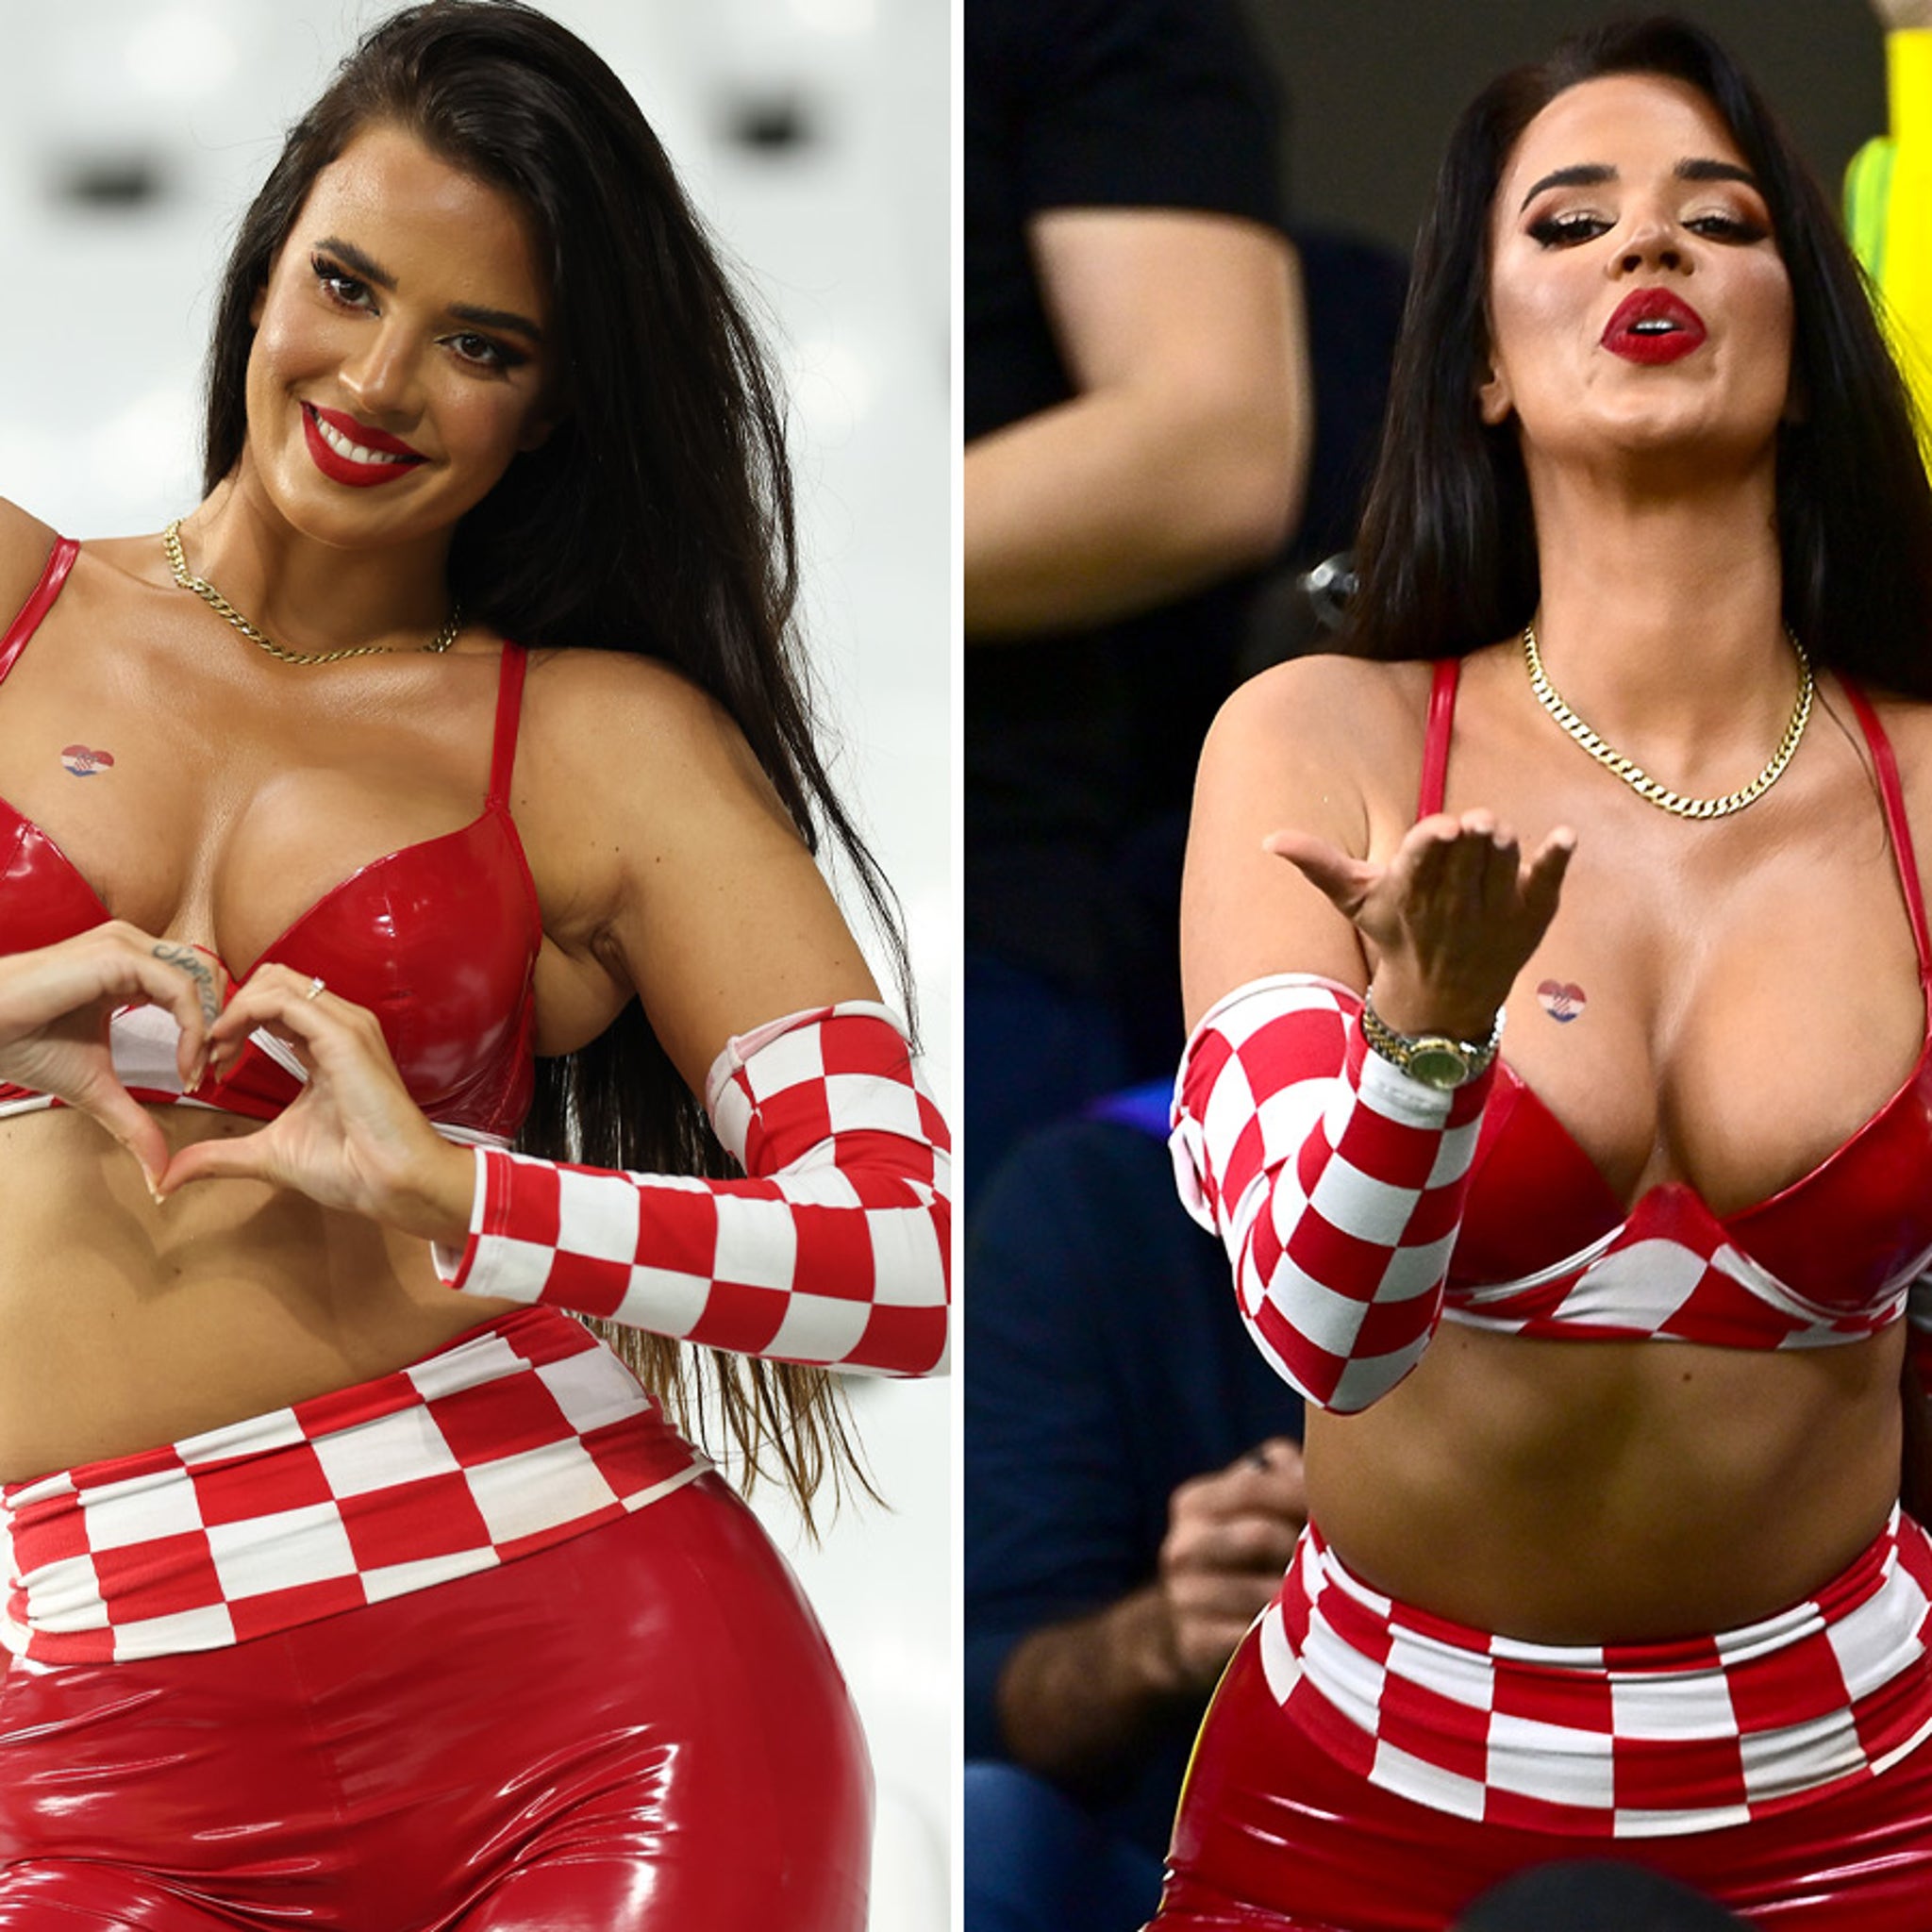 Model Ivana Knoll Celebrates Croatias Huge World Cup Win In Sexy Outfit photo pic photo